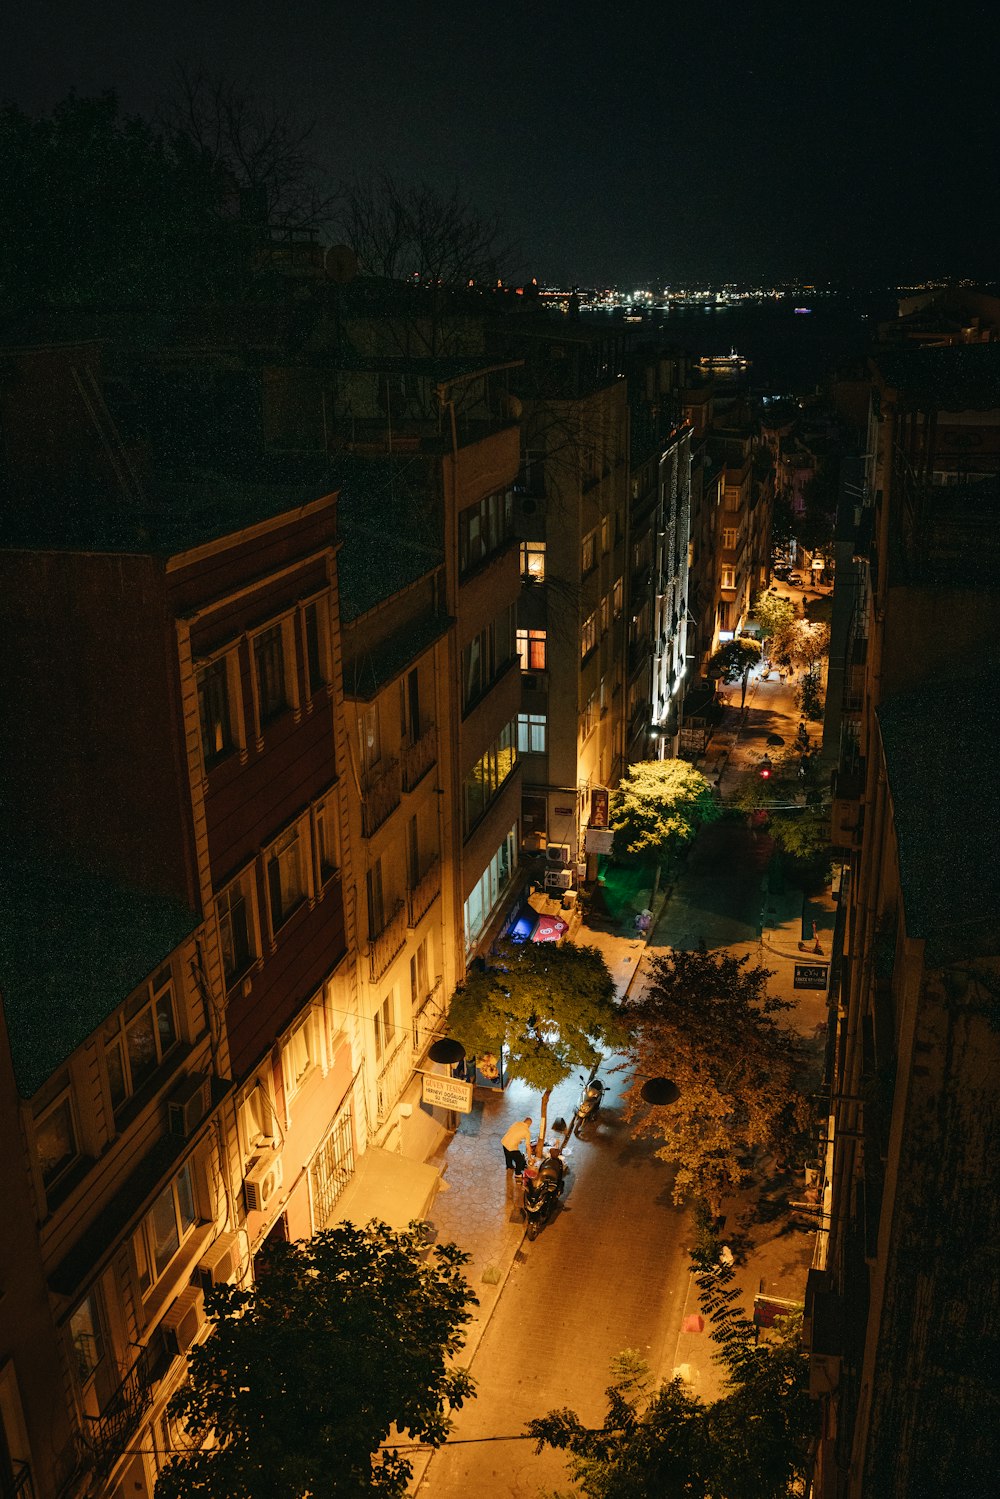 a view of a city street at night